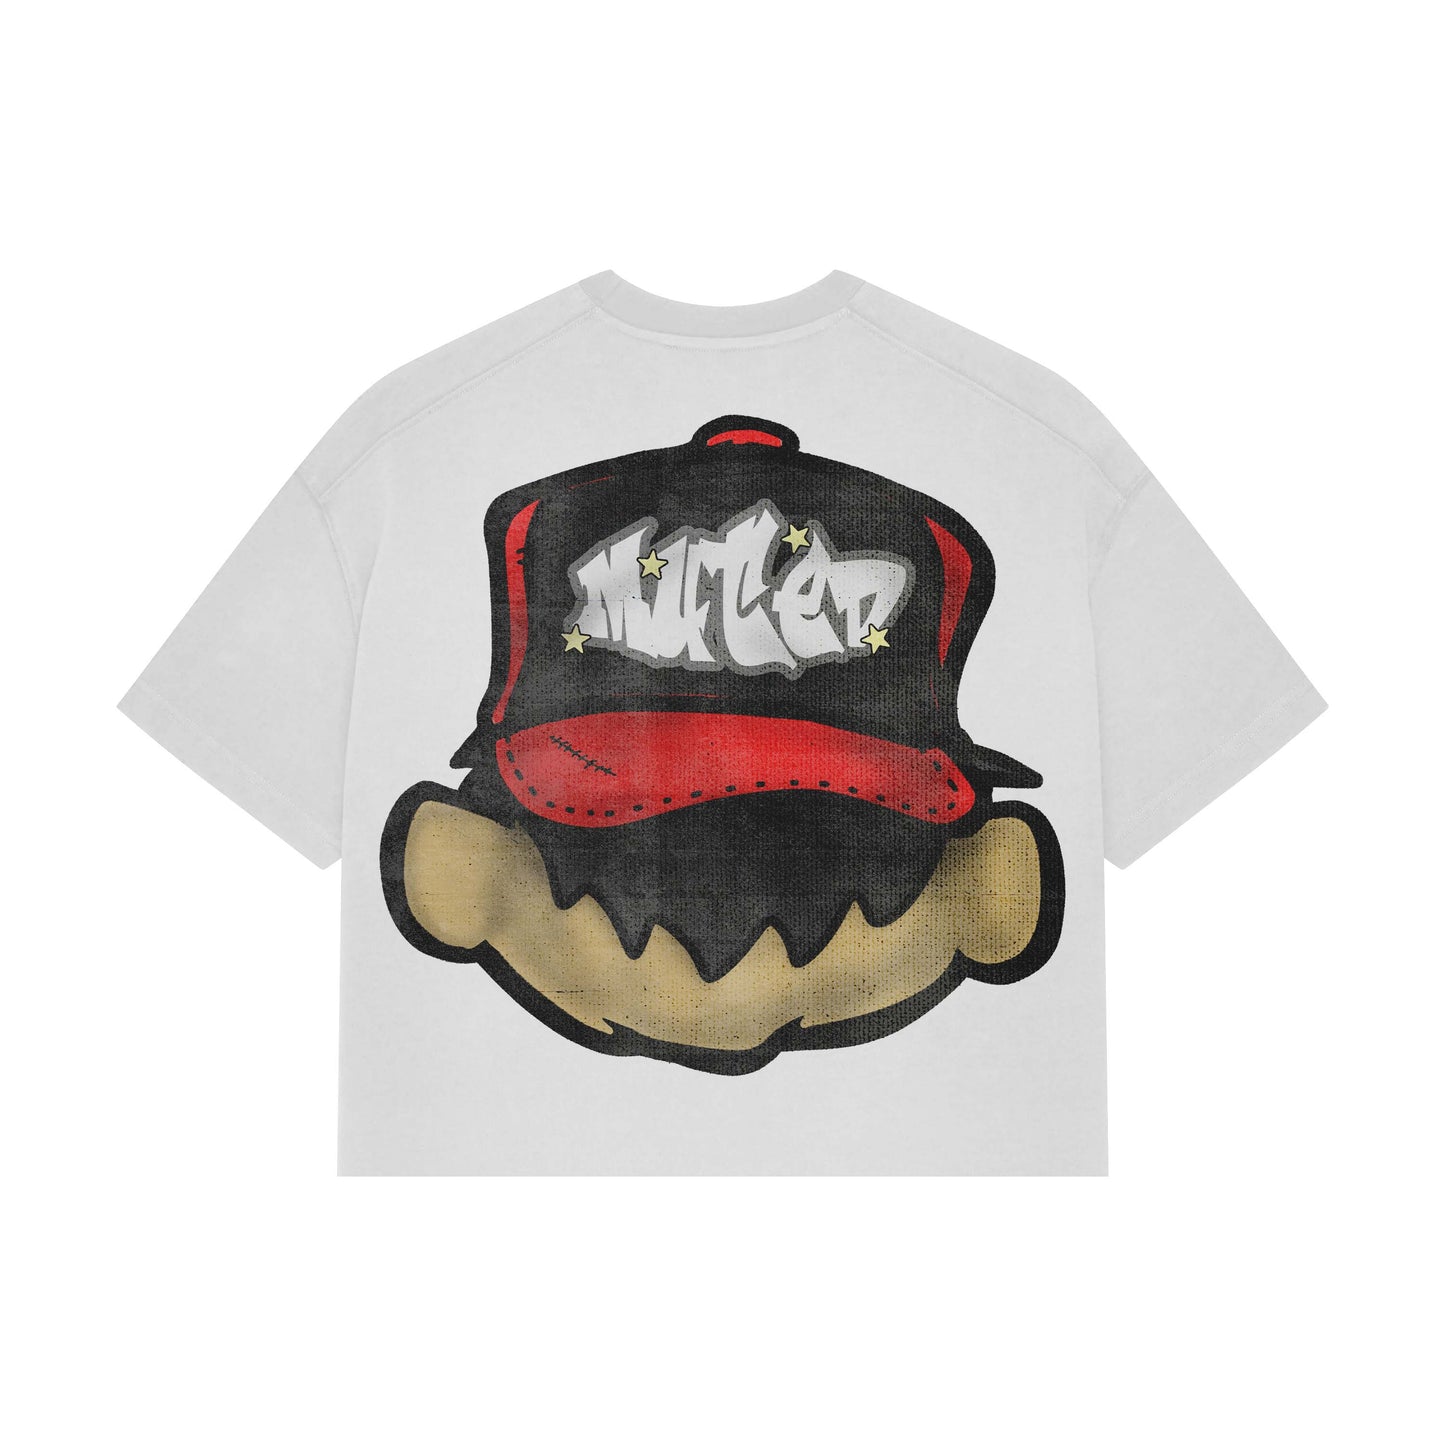 “MUTED PERSONALITIES WHITE +RED TEE”